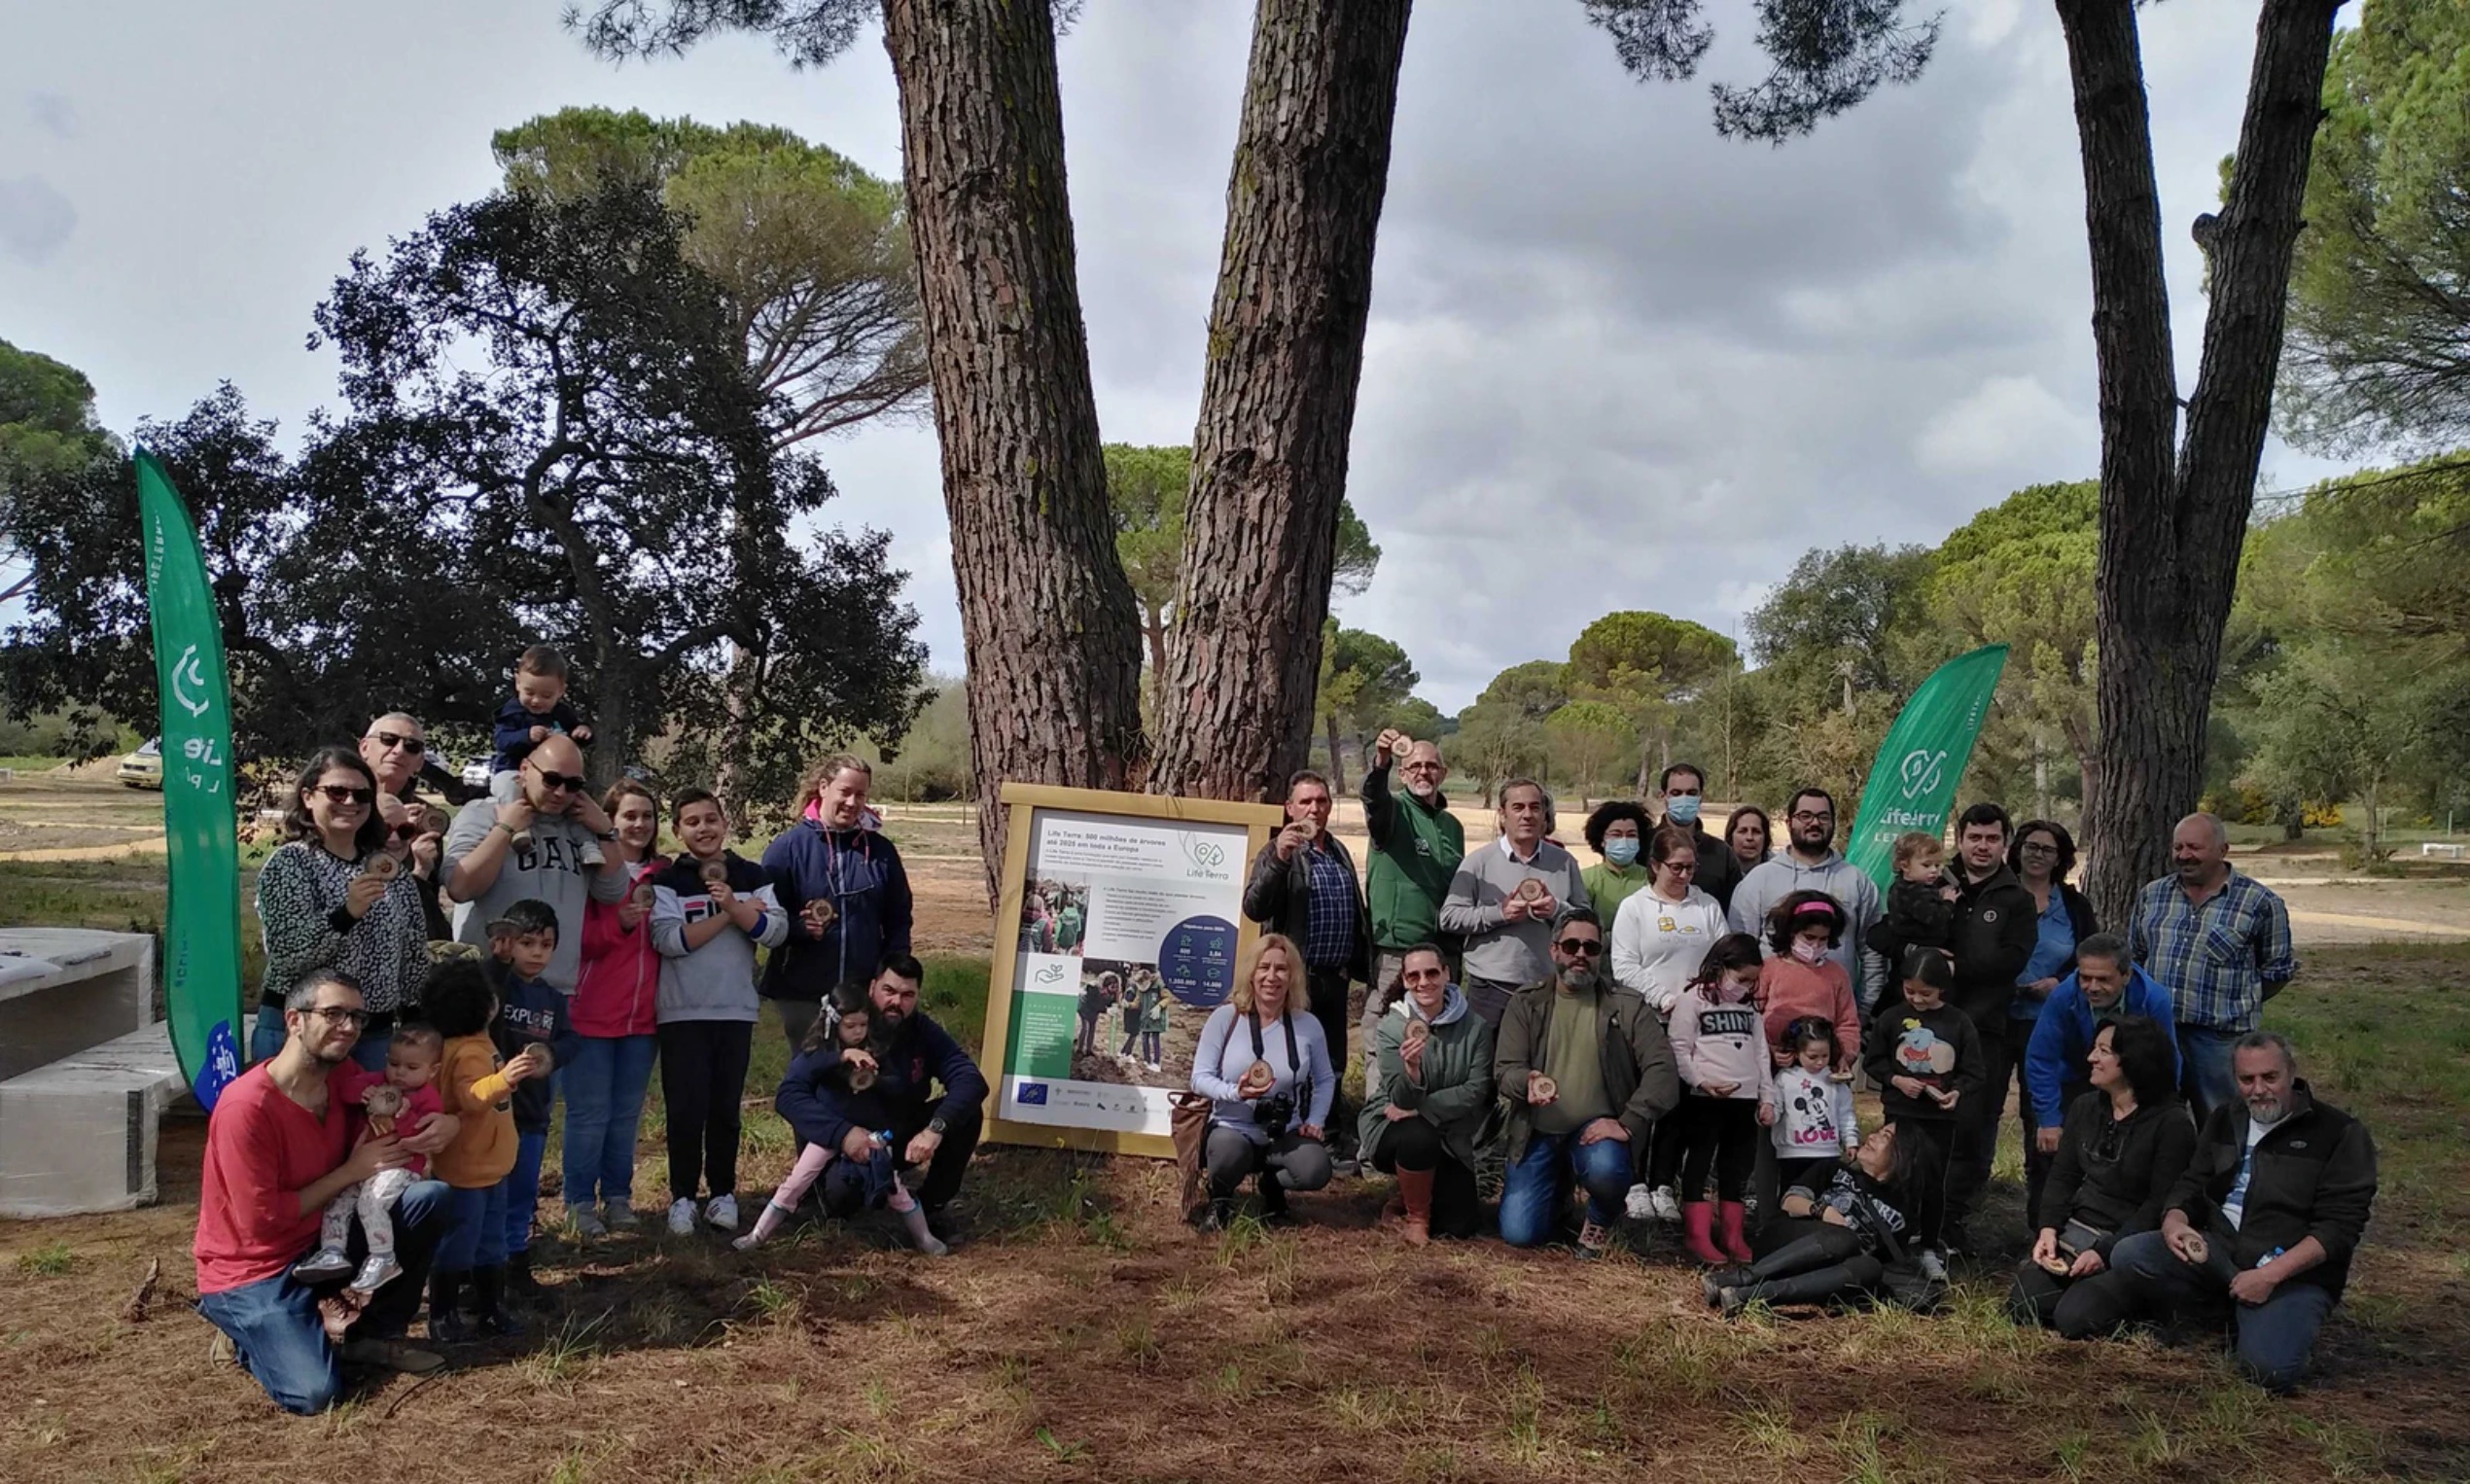 The Municipality of Benavente is preparing a new urban park that will improve the people´s connection with nature and a sustainable life. Sunday 13 March, Life Terra was there to help, prepare a comprehensive set of actions in climate and environment education and...  plant 15 trees together! Benavente is an ancient town in the Santarém district, near the fertile agricultural zone in the estuarine zone of the river Tagus, where we can also find surprisingly biodiverse cork oak “montados”. More photos ?